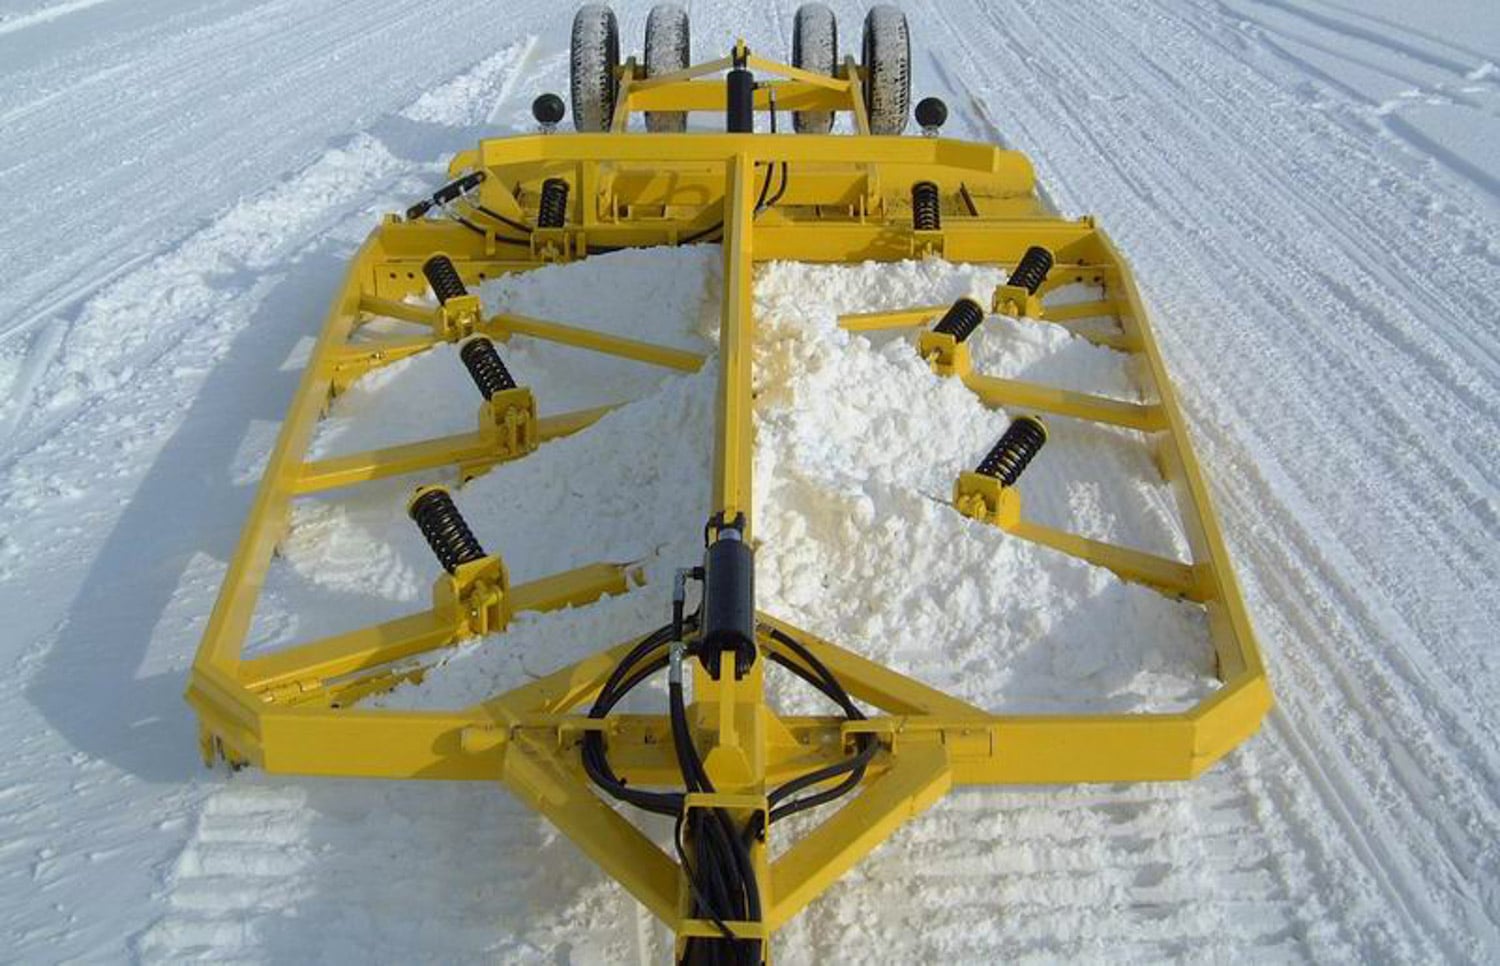 The eternal dilemma of winter trail grooming